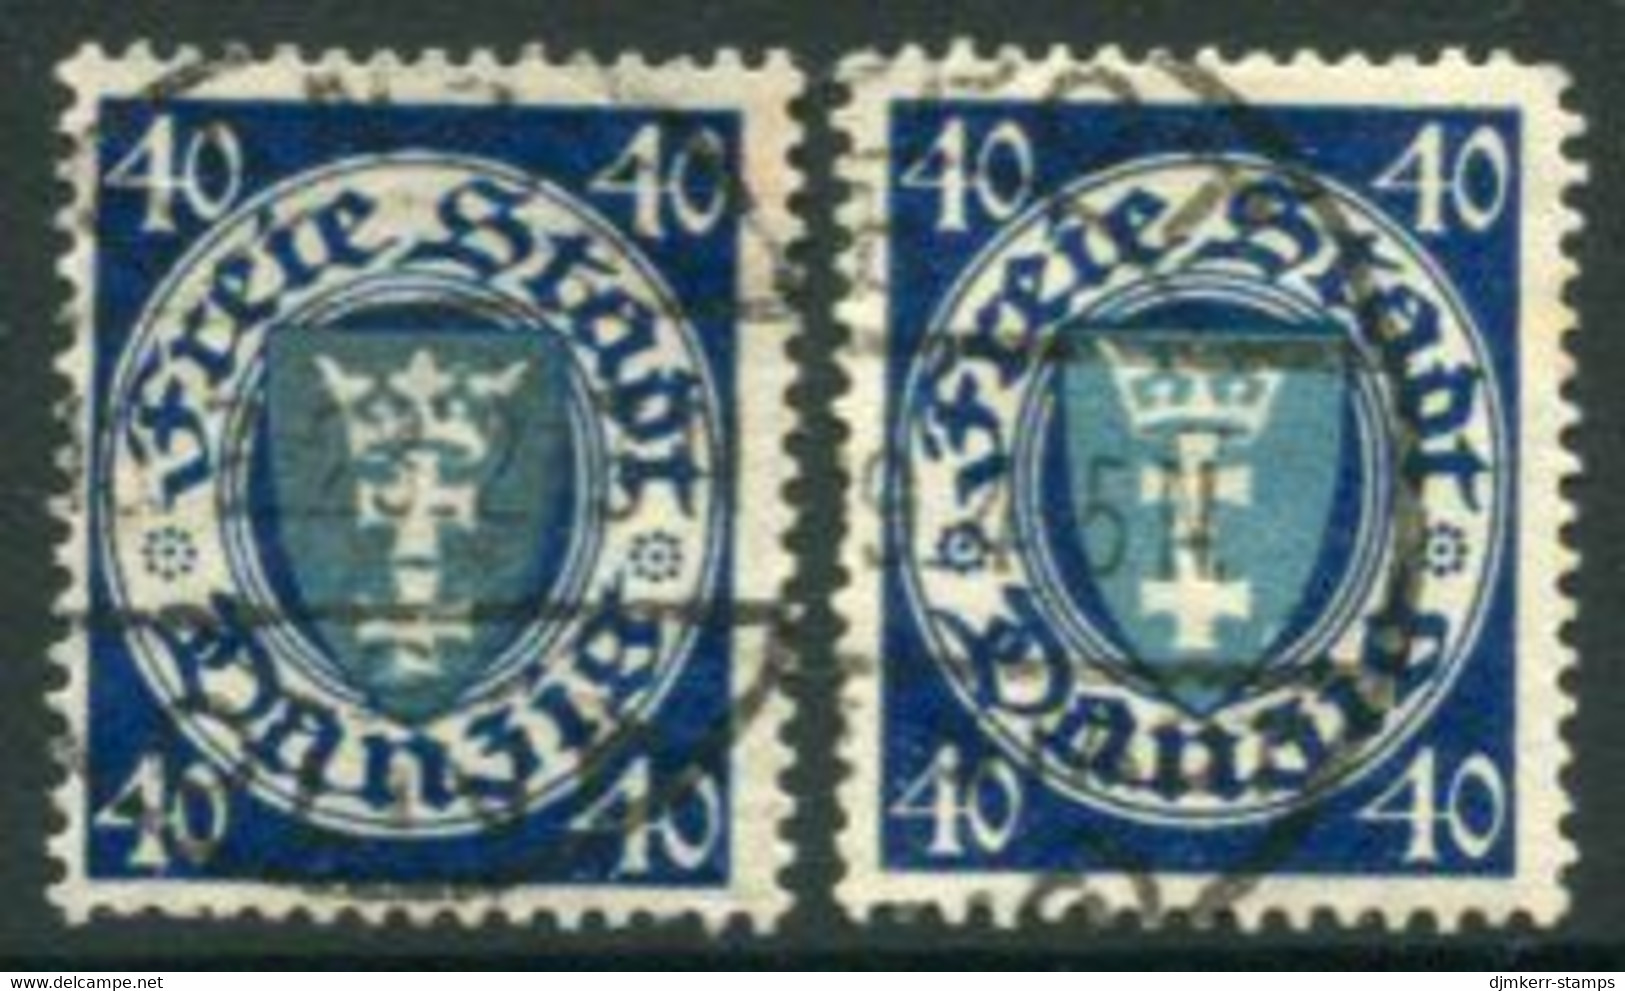 DANZIG 1924 Arms Definitive 40 Pf. In Two Shades, Used.. Michel  Spez..  199xa,xb  €46 - Afgestempeld